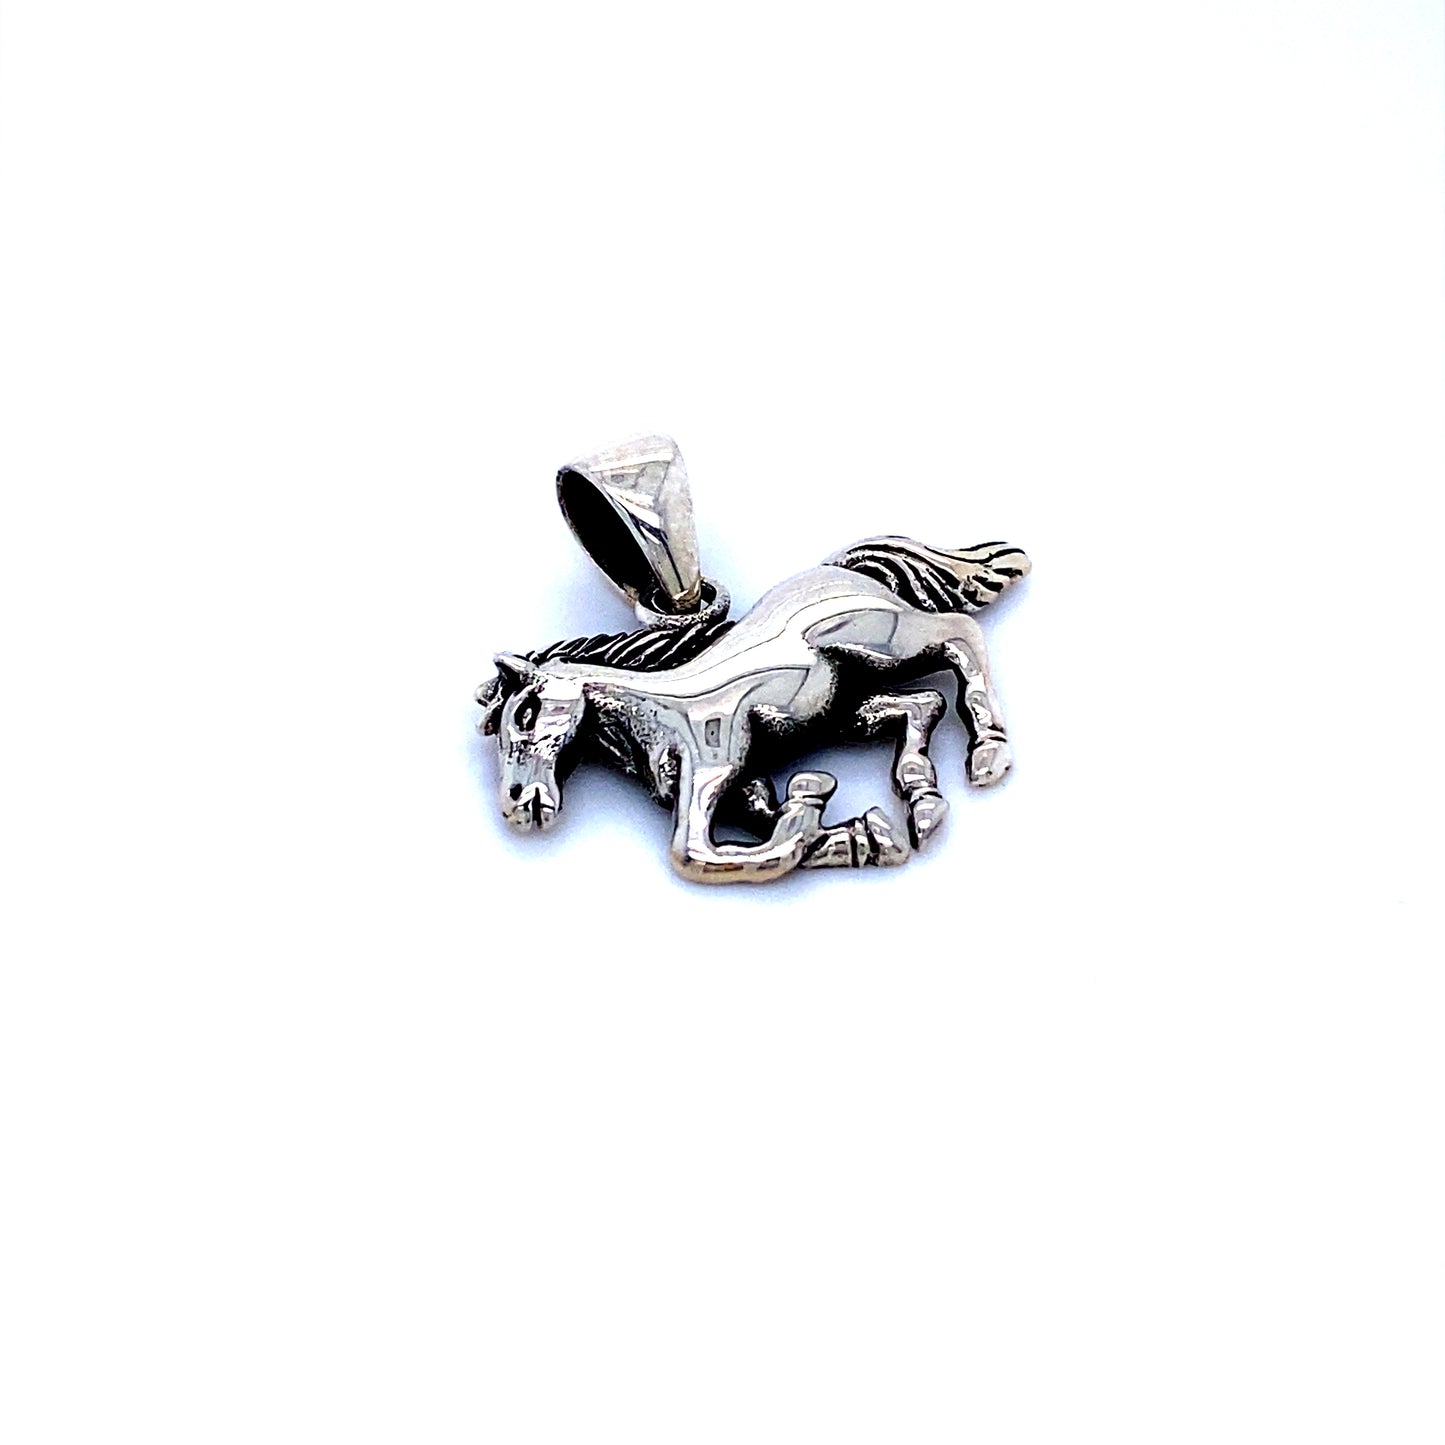 A Galloping Horse Charm by Super Silver on a white background.